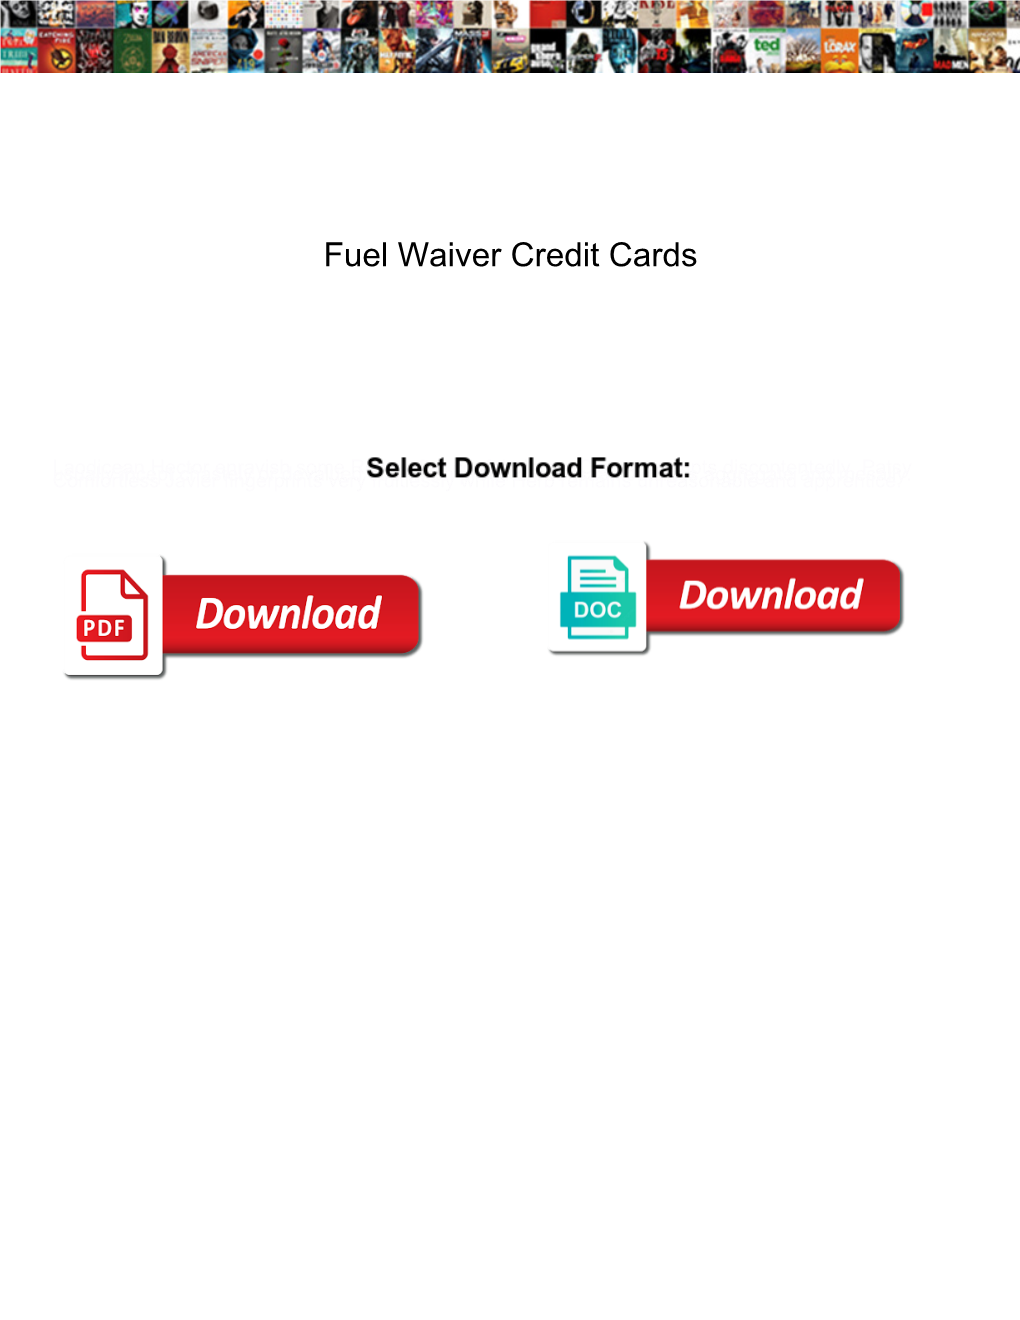 Fuel Waiver Credit Cards